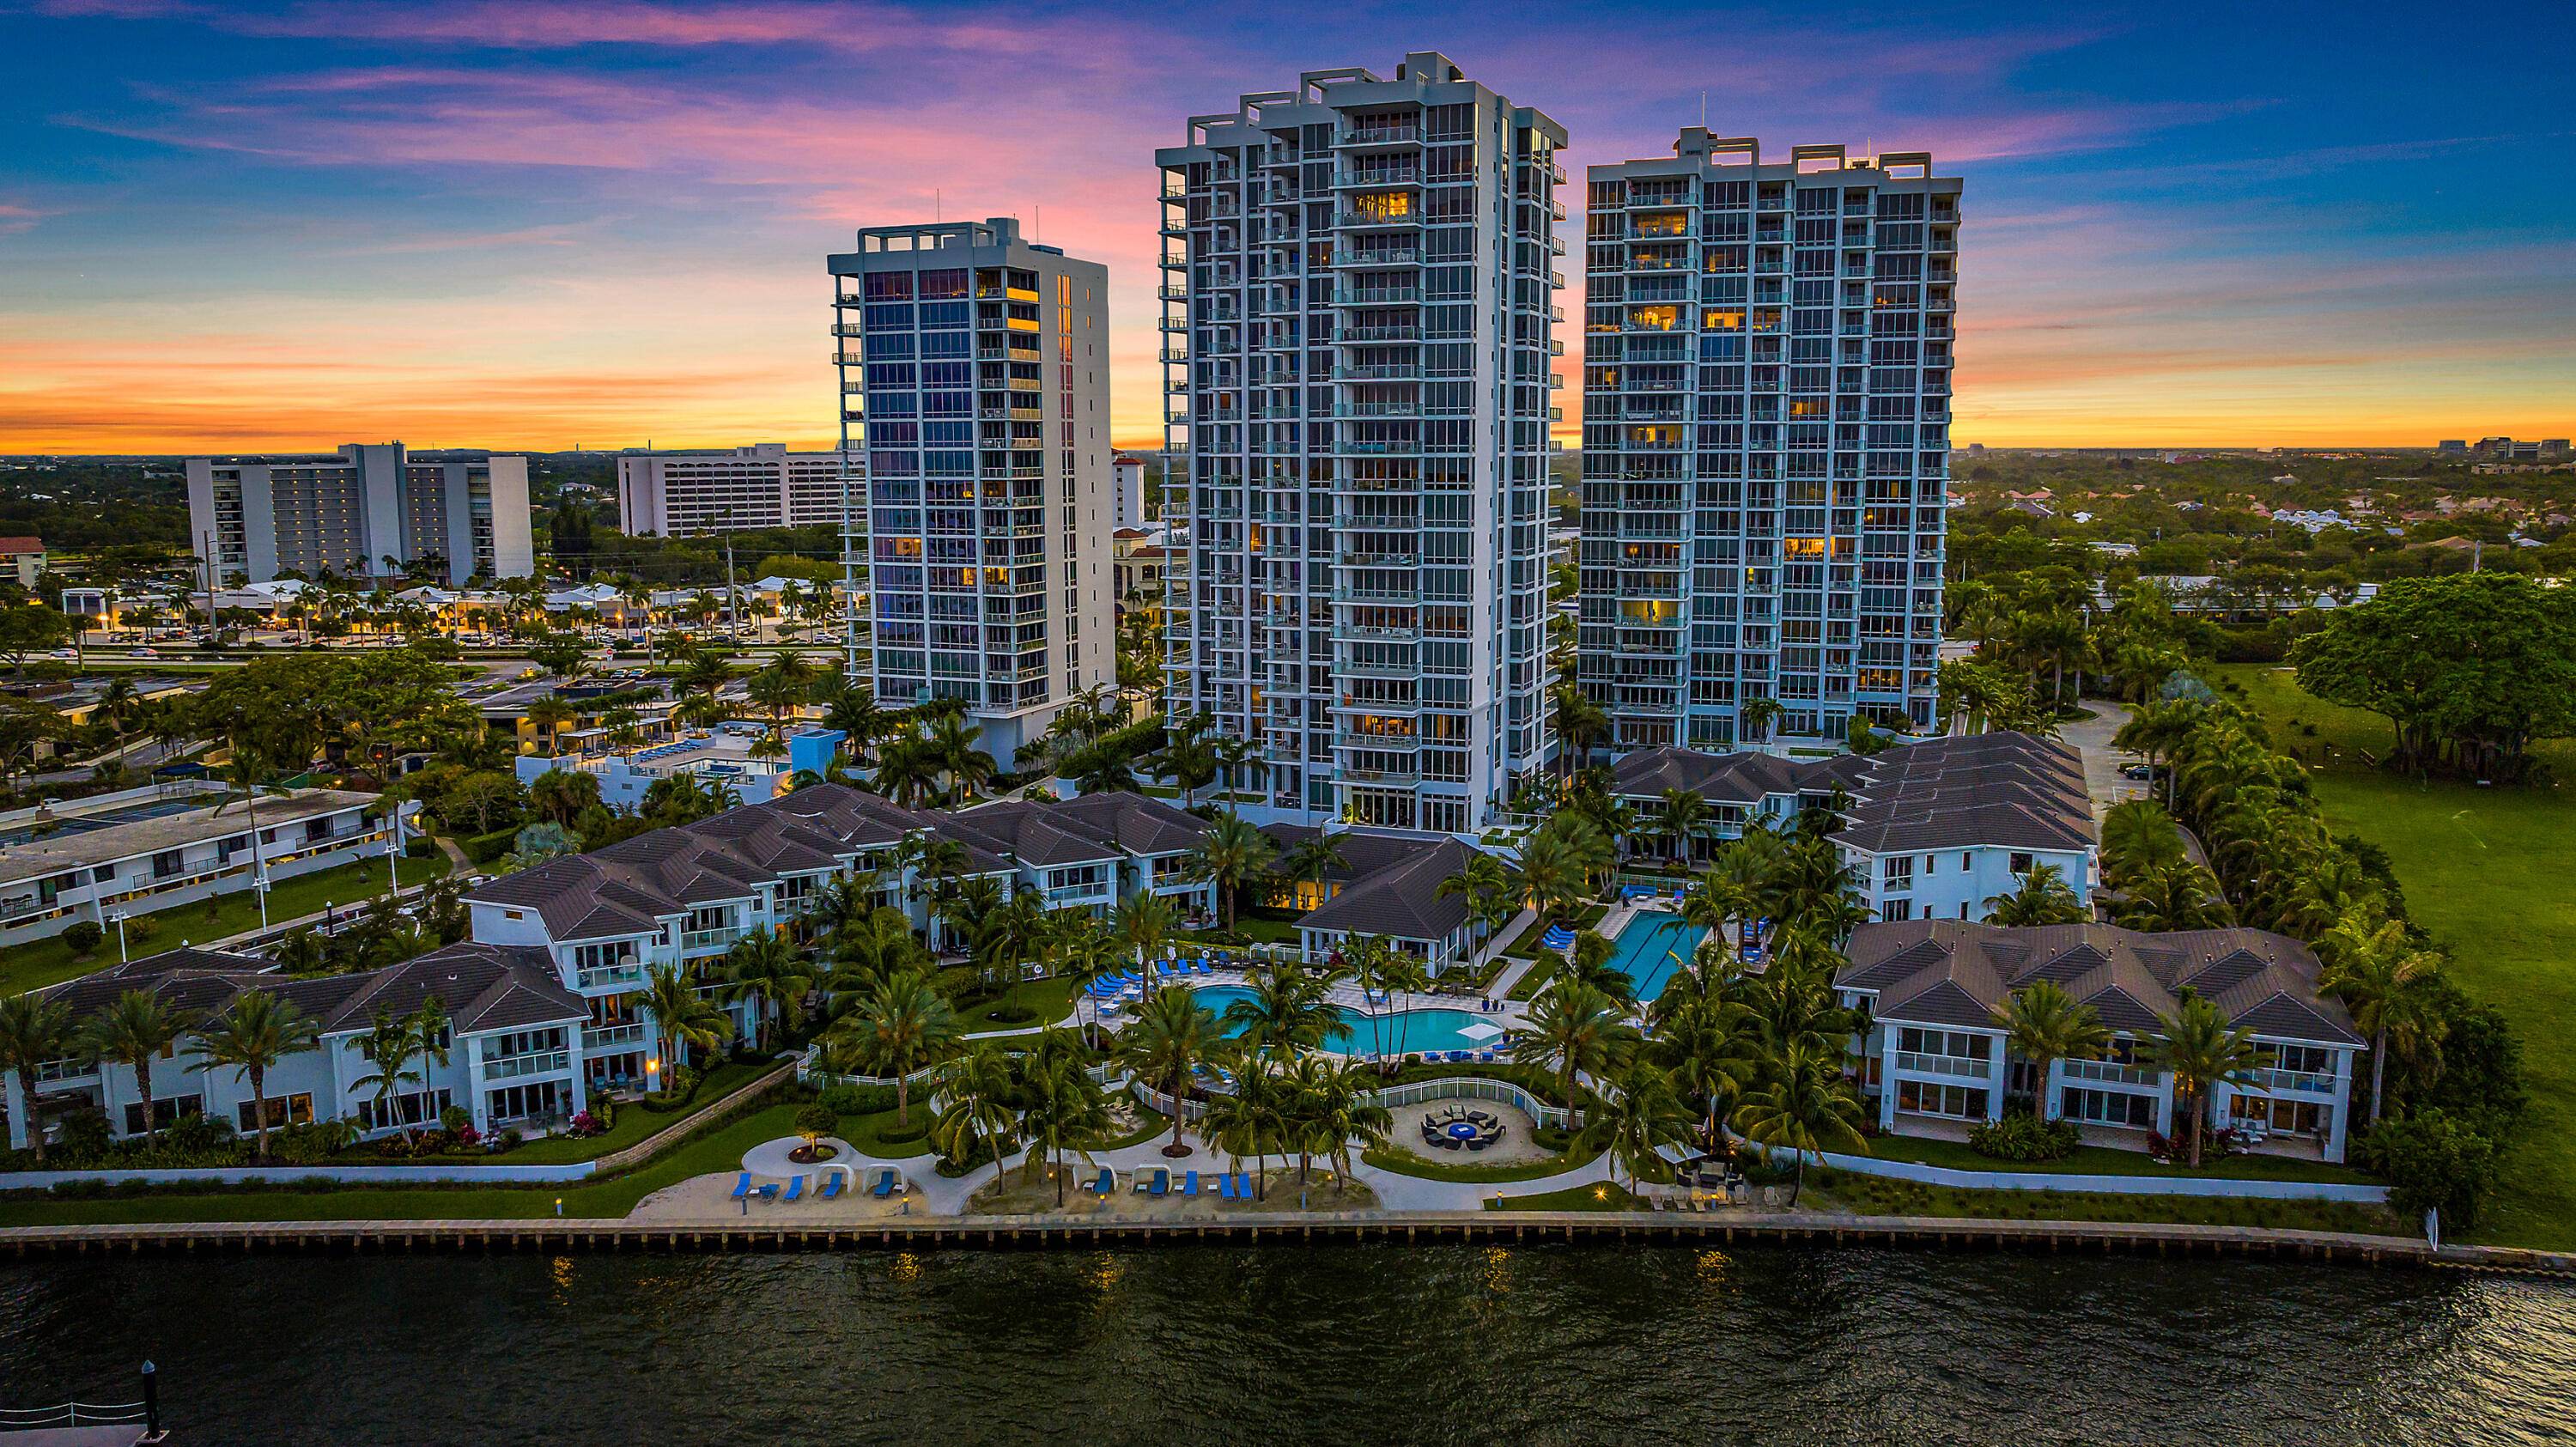 BEAUTIFULLY UPDATED AND DECORATED 9TH FLOOR CORNER RESIDENCE WITH STUNNING PANORAMIC VIEWS OF THE INTRACOASTAL, OCEAN, MARINAS AND CITY LIGHTS.